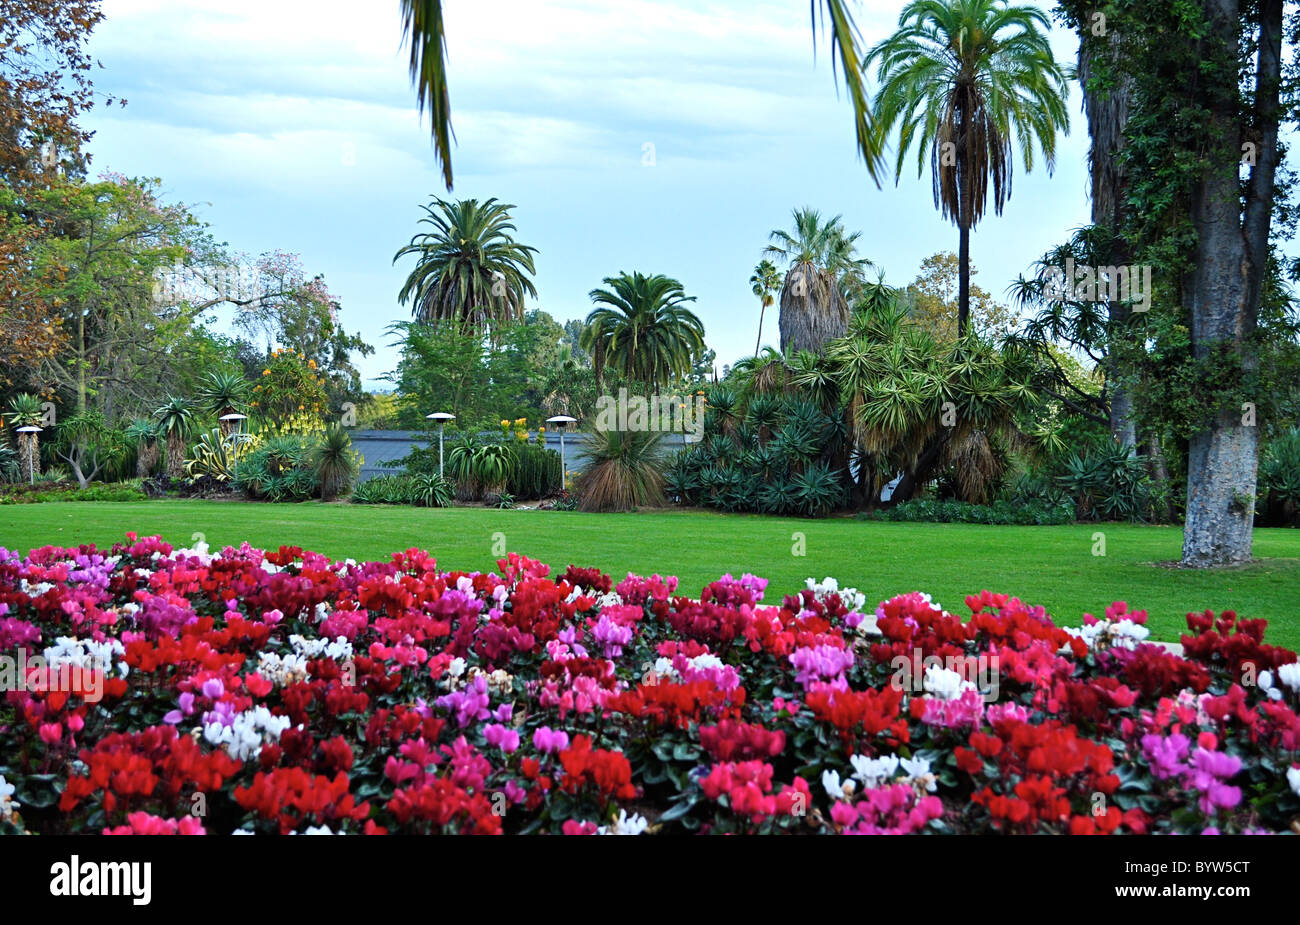 Winter cyclamen and palms in temperate Huntingdon Gardens, Los Angeles, just before Christmas, 2010. Stock Photo